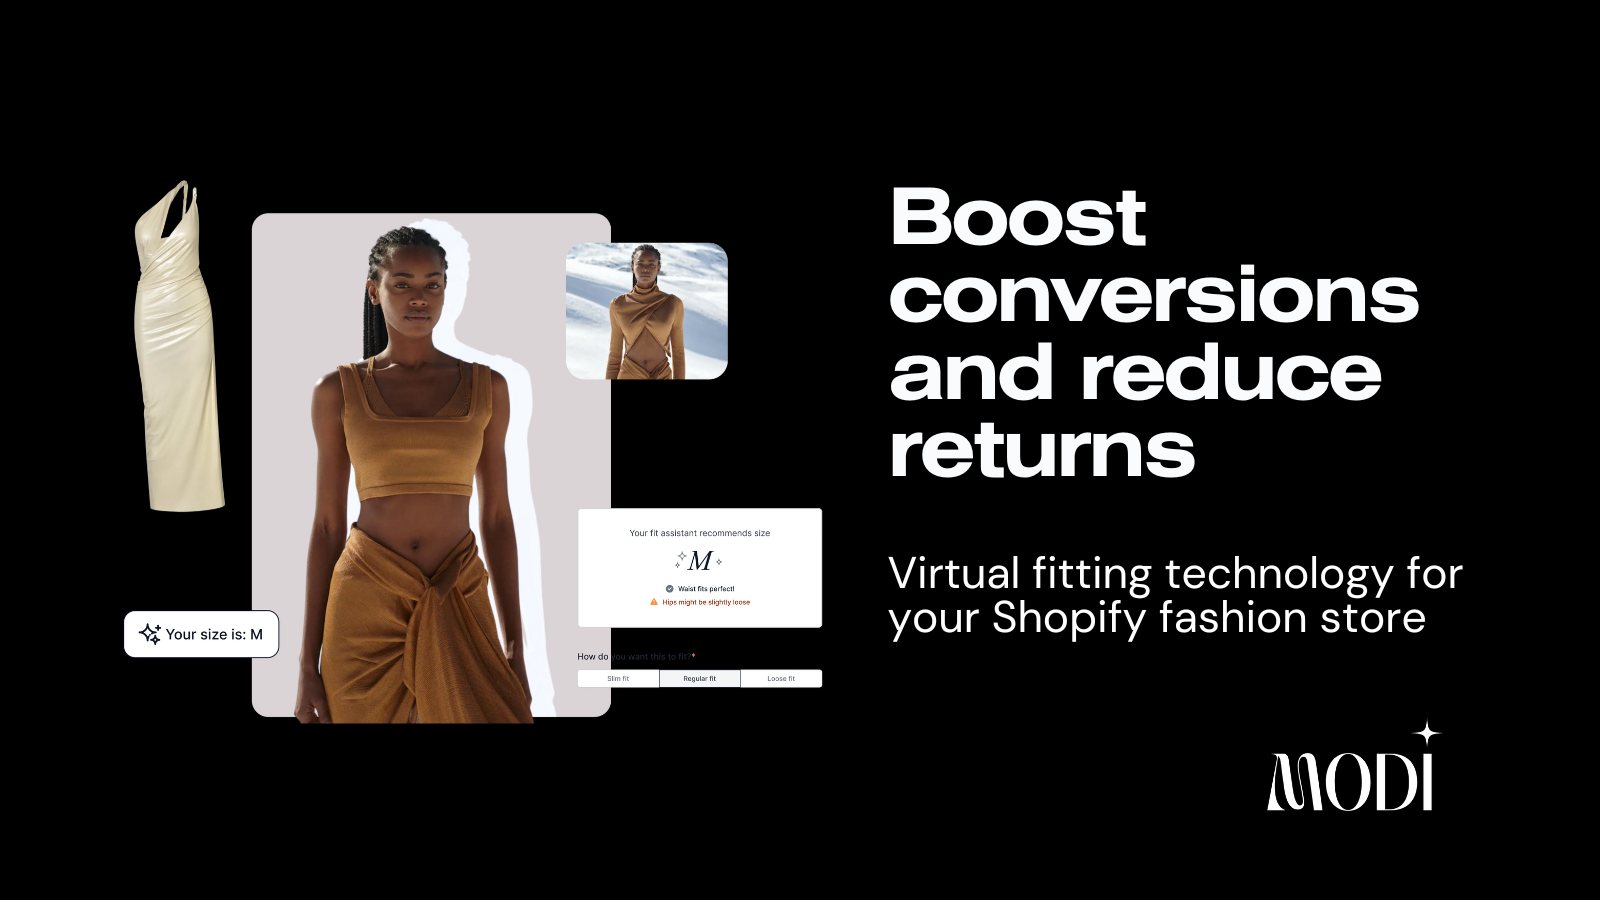 Boost conversions and reduce returns